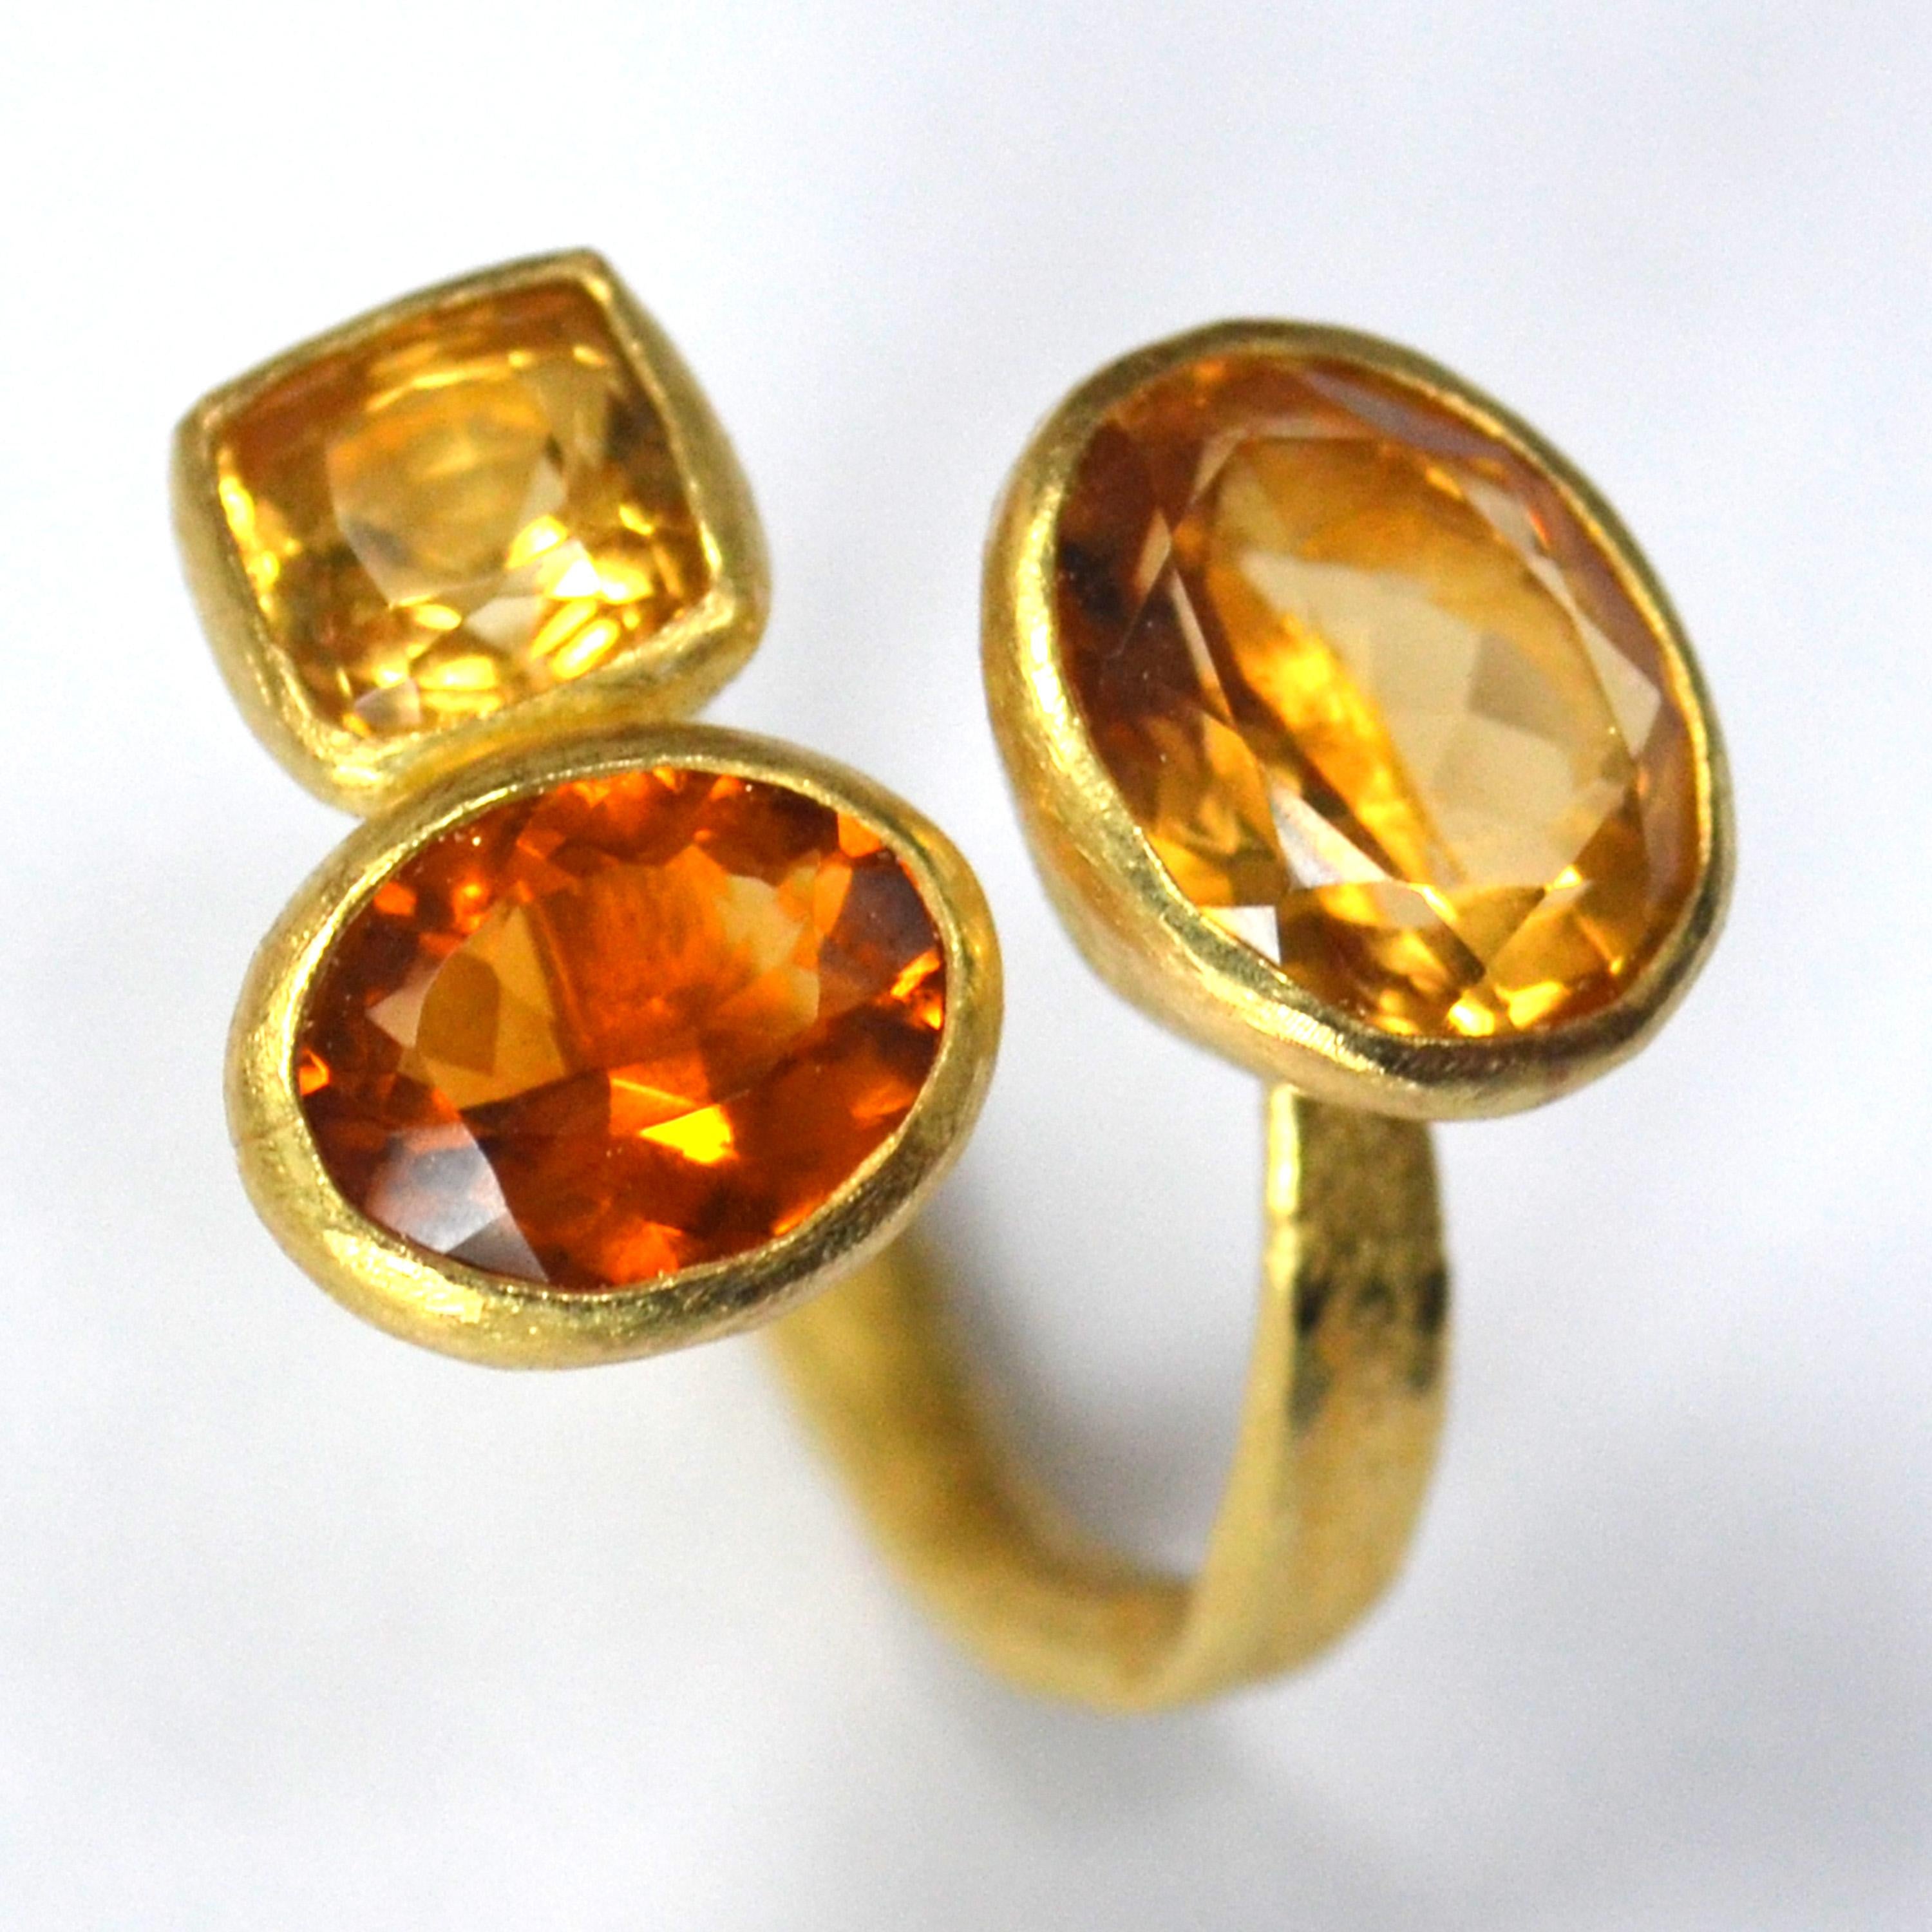 18k yellow gold reticulated texture open ring with three citrines:
x1 oval 5 carat golden citrine
x1 cushion cut 2 carat golden citrine
x1 oval 3 carat madiera citrine.

This ring is handmade by London goldsmith Disa Allsopp, known for her organic